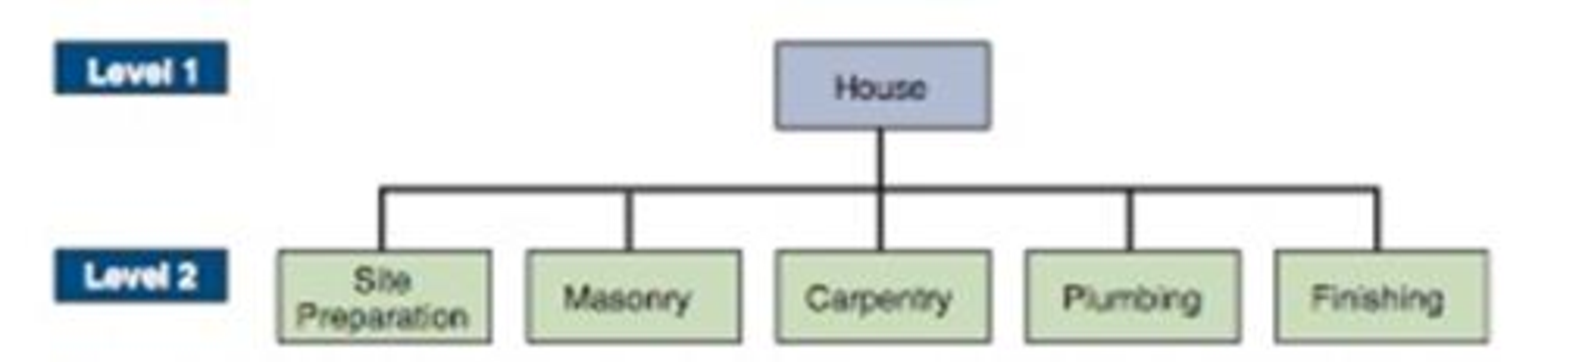 Chapter 3, Problem 1P, The work breakdown structure (WBS) for building a house (levels 1 and 2) is shown below: a) Add two 